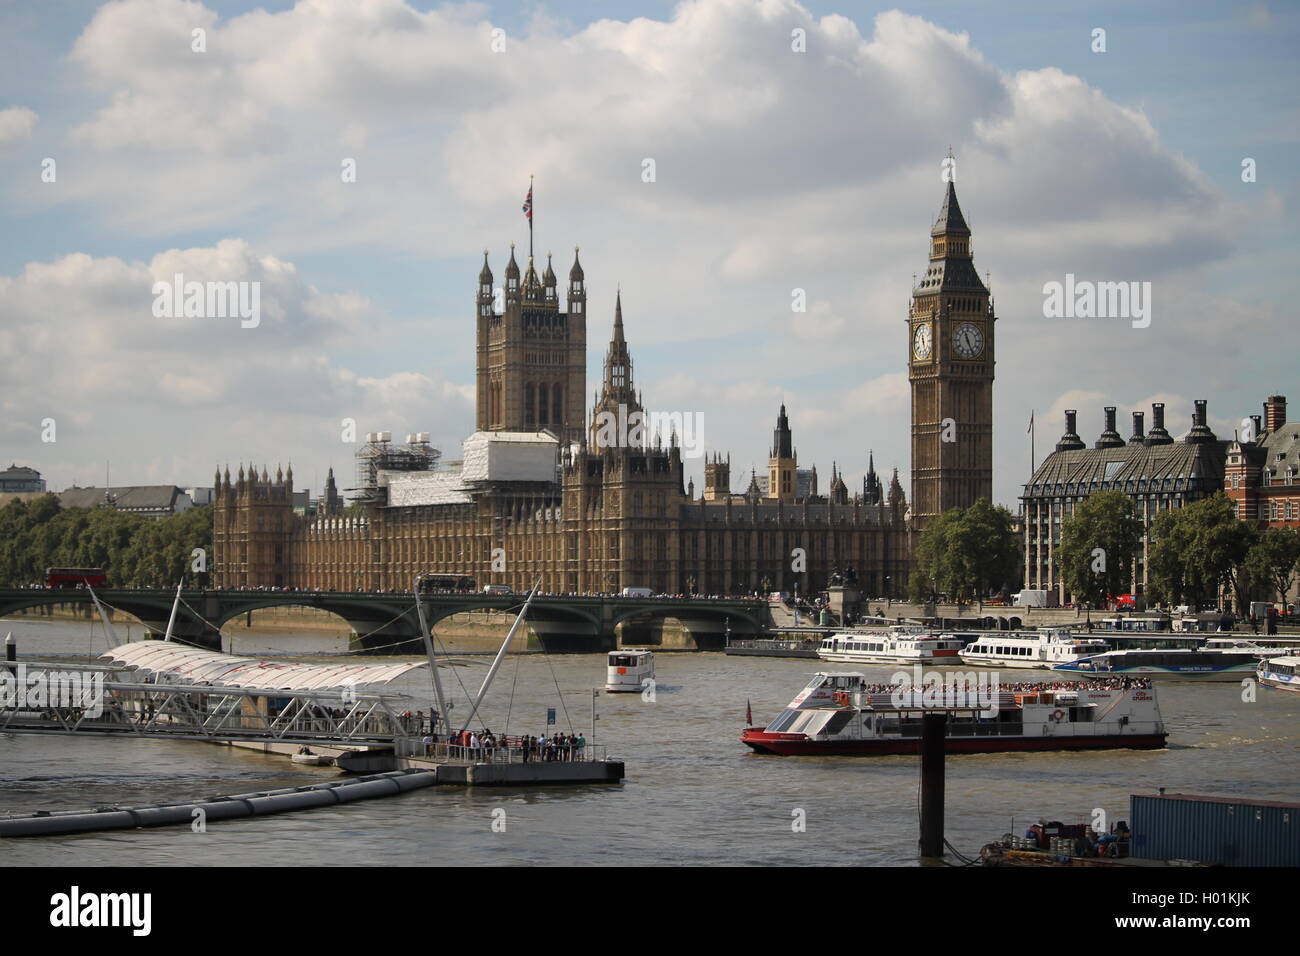 London skyline, London, capital city, Brexit, tourist, UK, Great Britain, River Thames, capital of England, House of Parliament Stock Photo